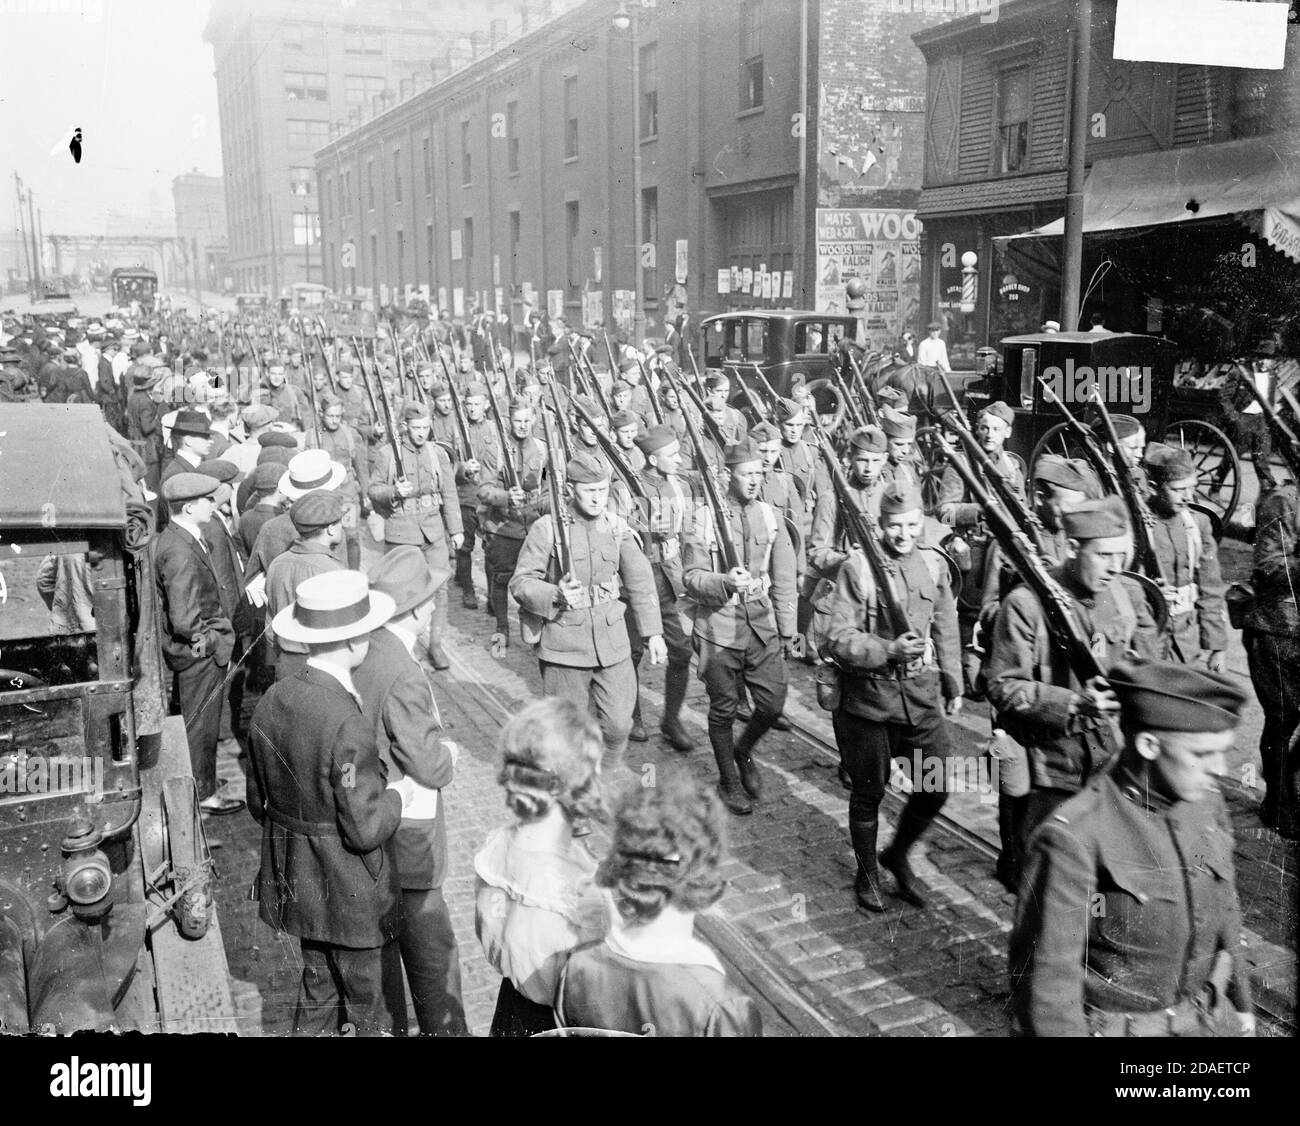 Soldiers, 33rd Division, U. S. Army, on parade, upon returning from France, spectators lining street, Chicago, Illinois. Stock Photo